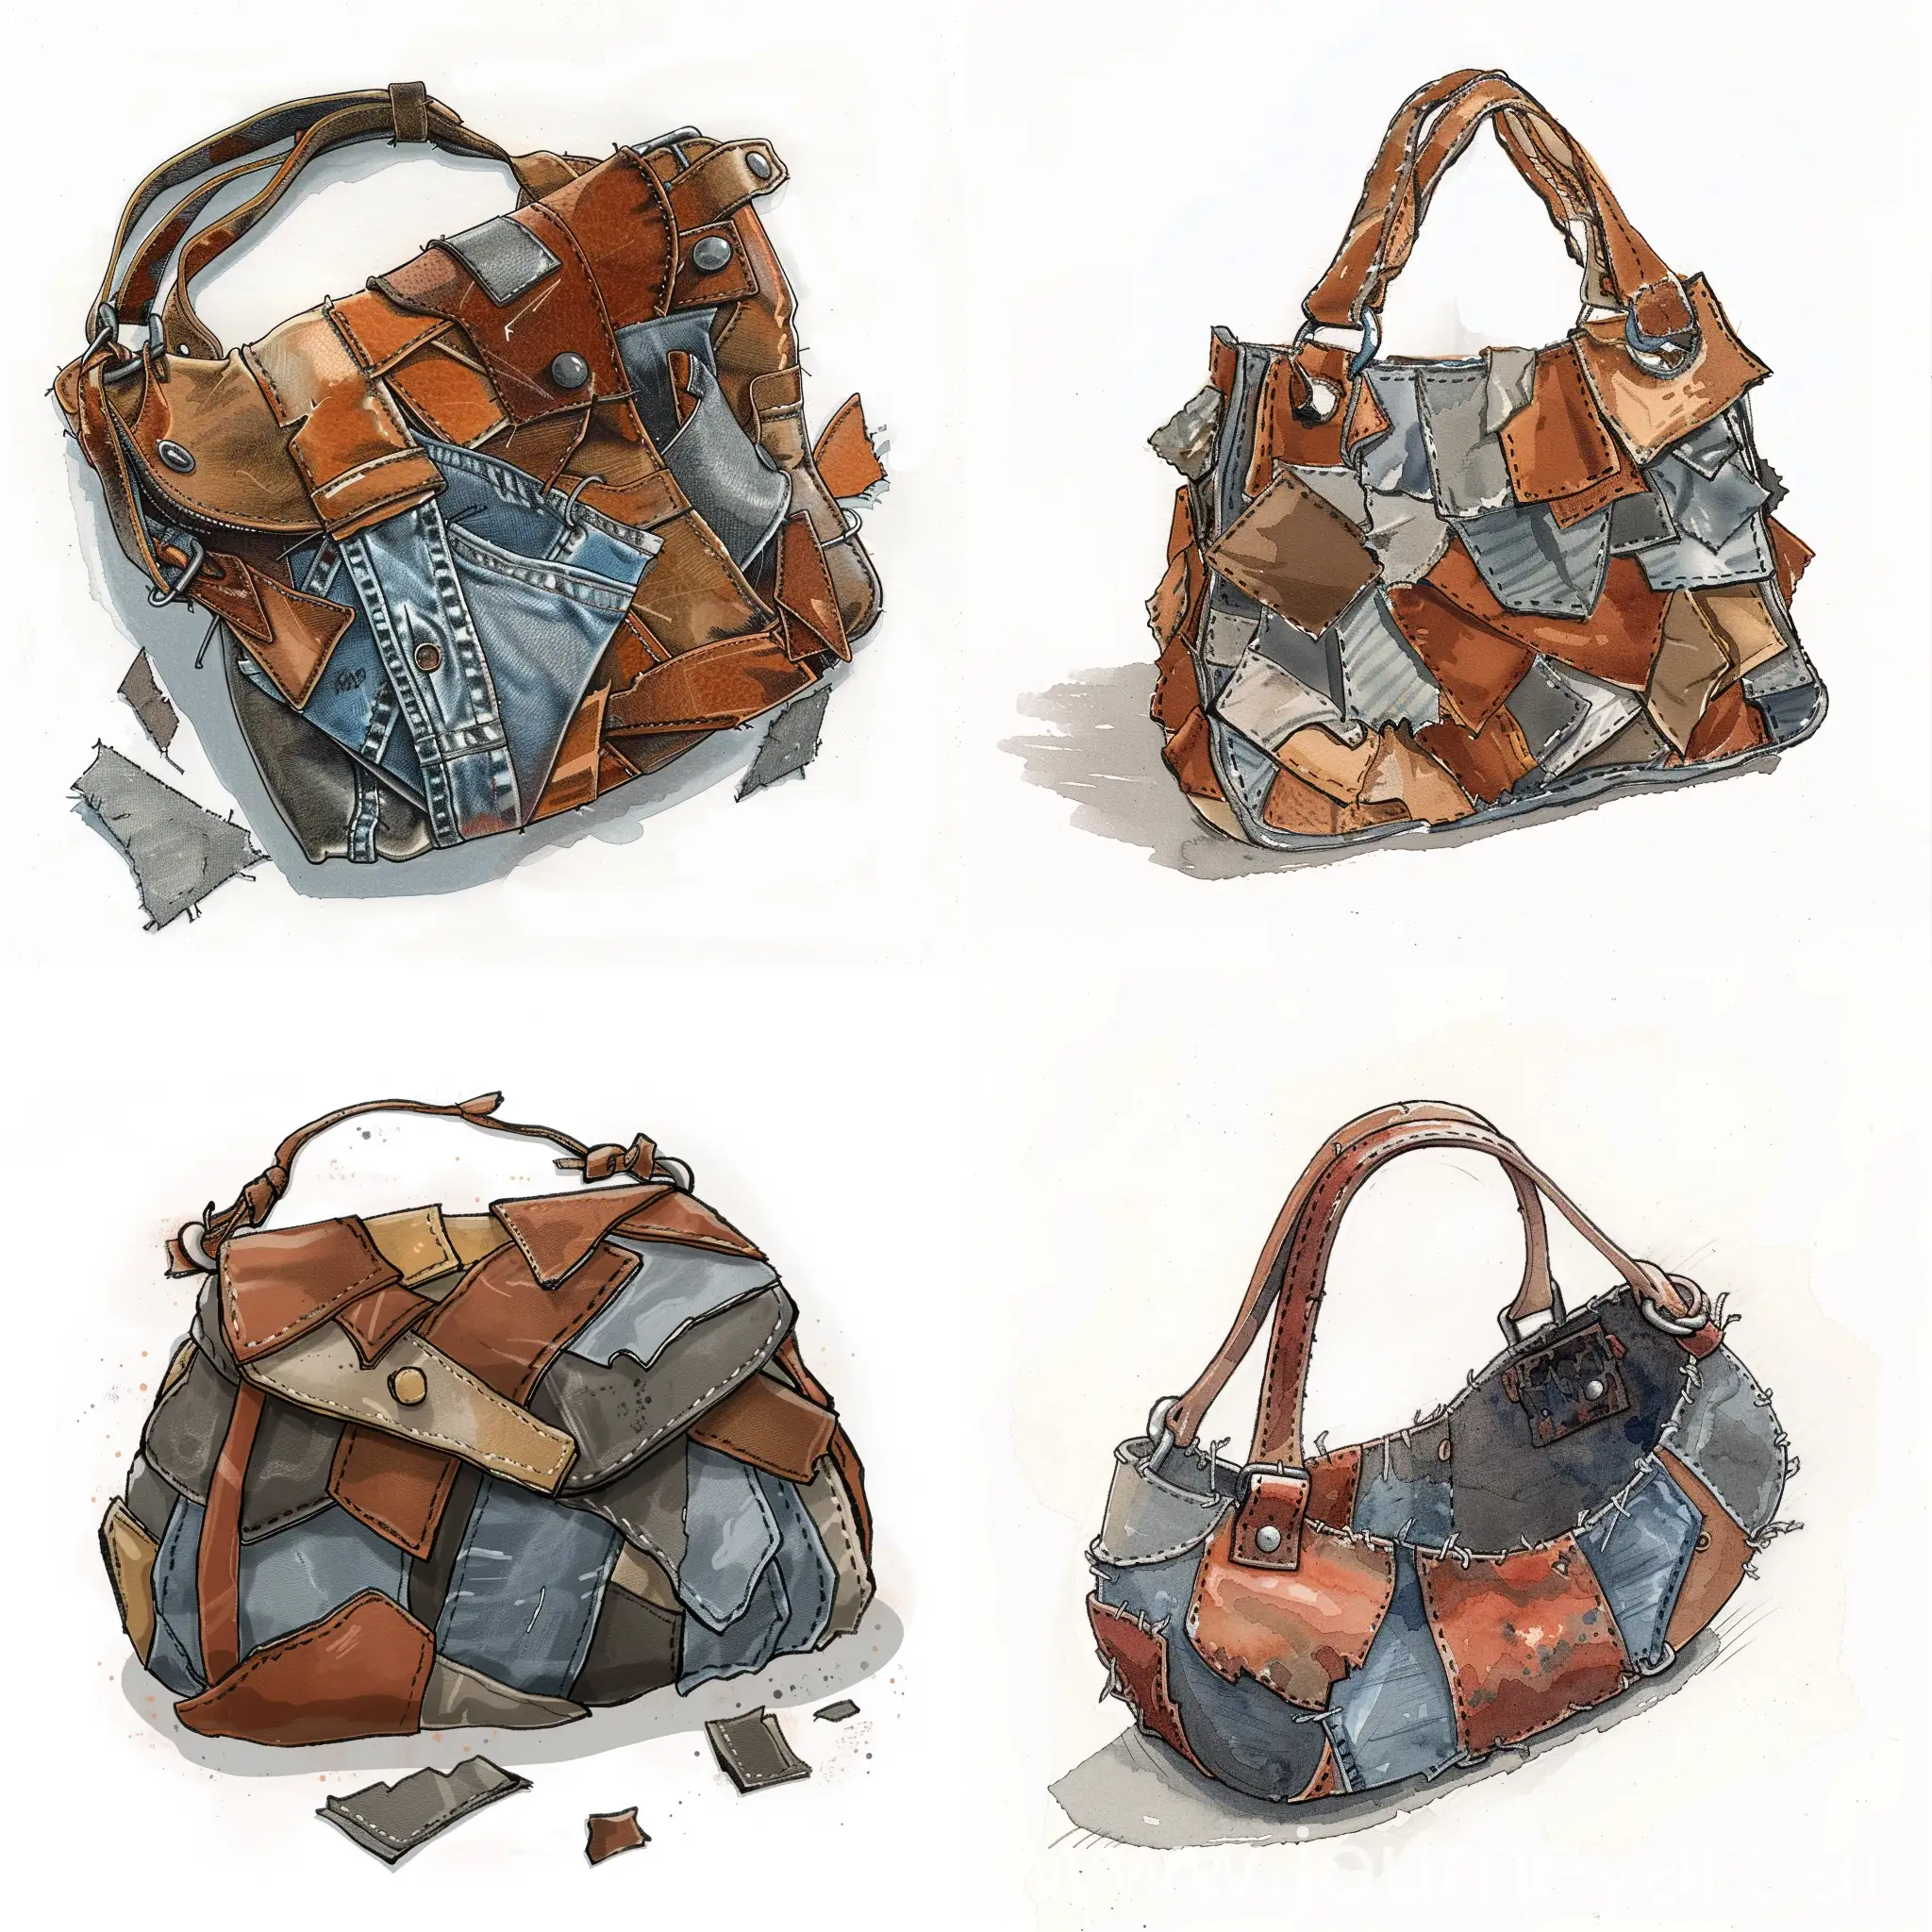 An illustration of a small leather purse made of irregularly shaped scraps of brown and grey leather and pieces of jean